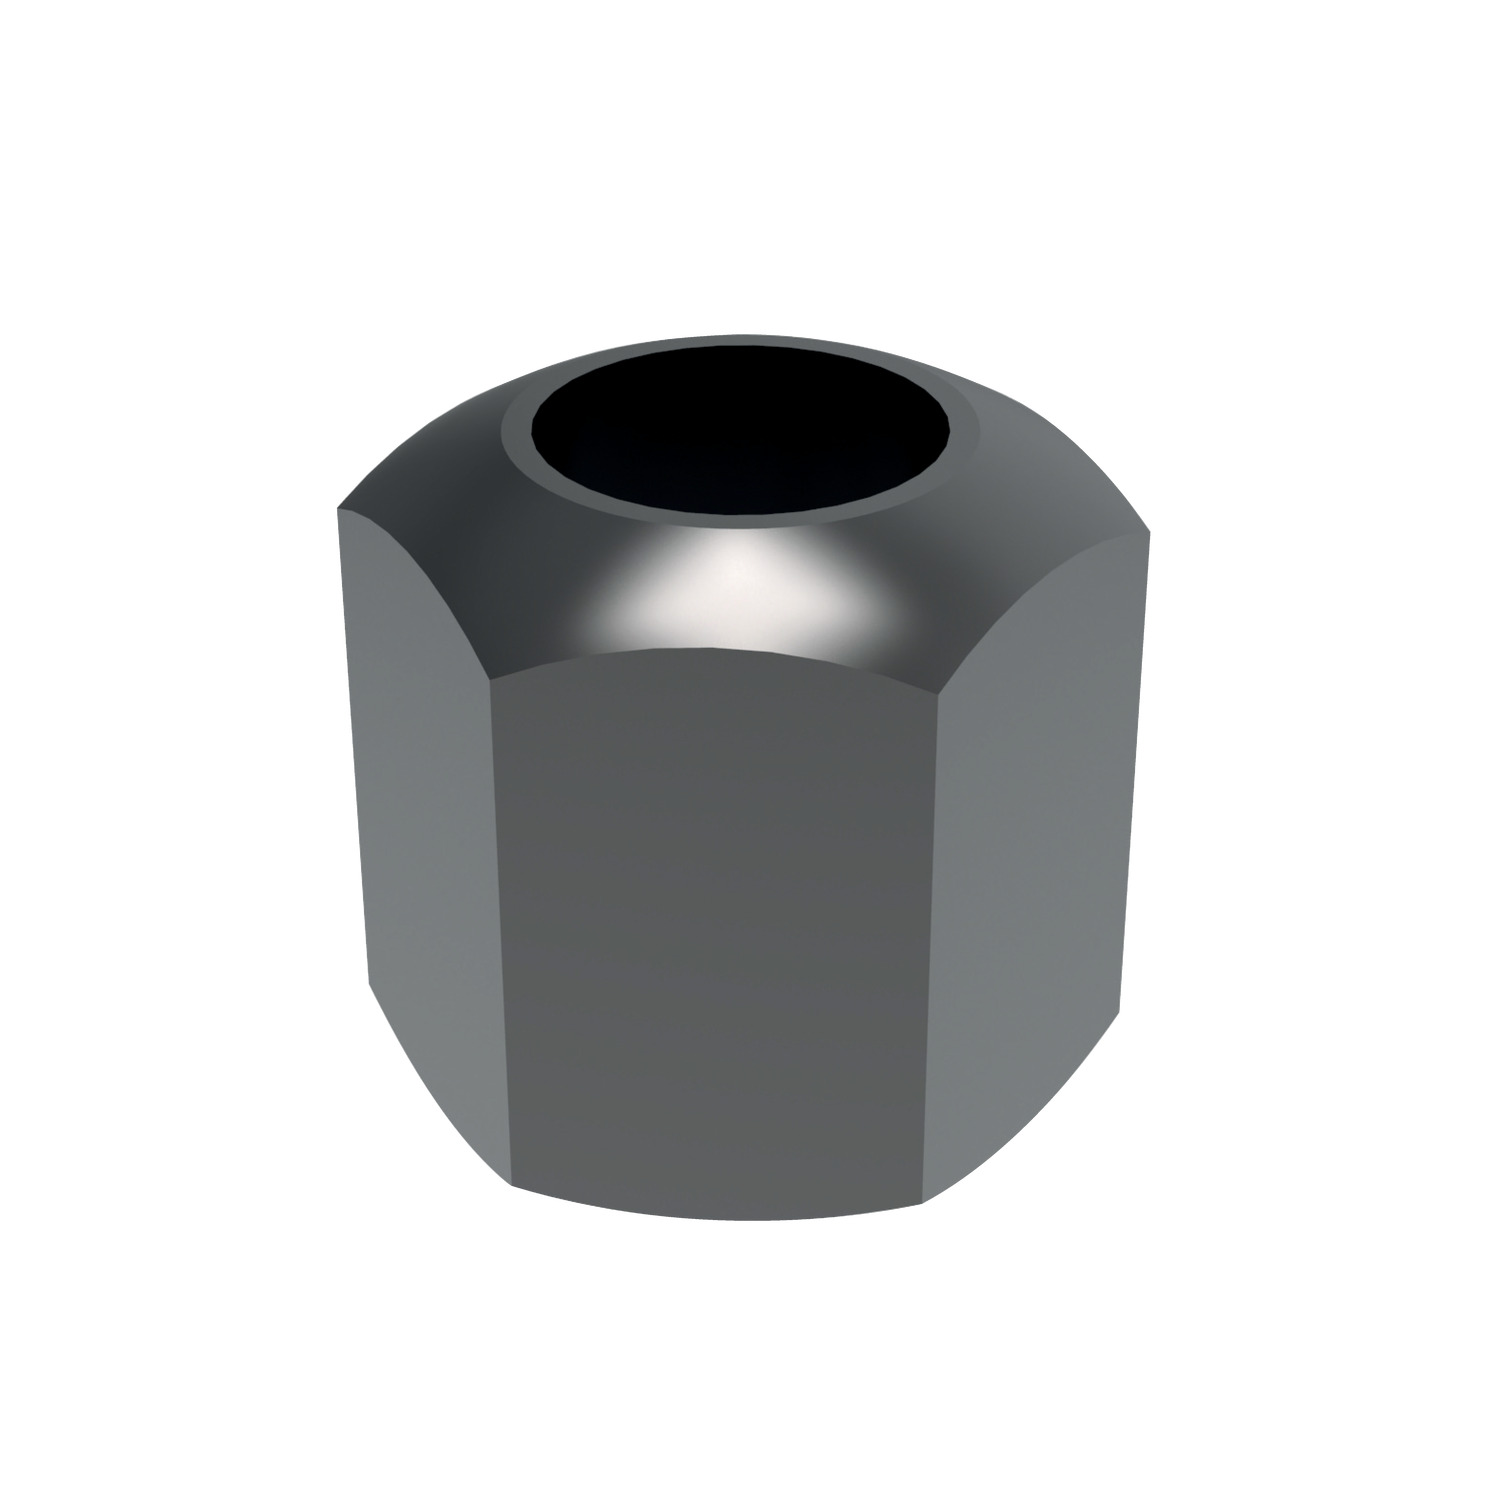 Fixture Collar Nut - Steel Fixture nuts, collar nuts, extensions nuts and swivel nuts in steel made from heat treated steel.